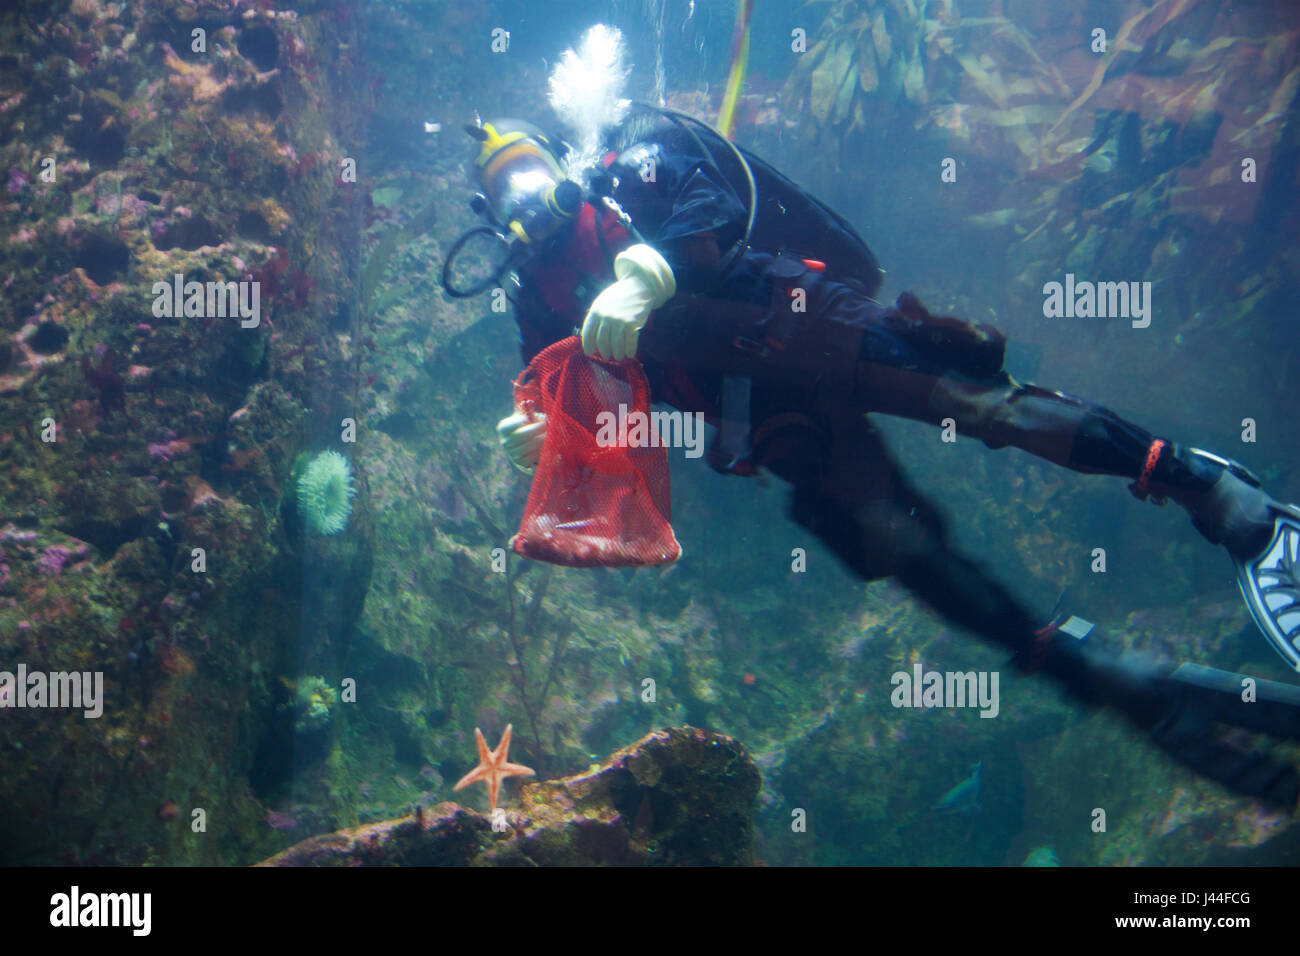 SEATTLE, WASHINGTON, USA - JAN 23rd, 2017: Scuba Diver swimming to large underwater viewing window in the Seattle aquarium and feeding fish Stock Photo